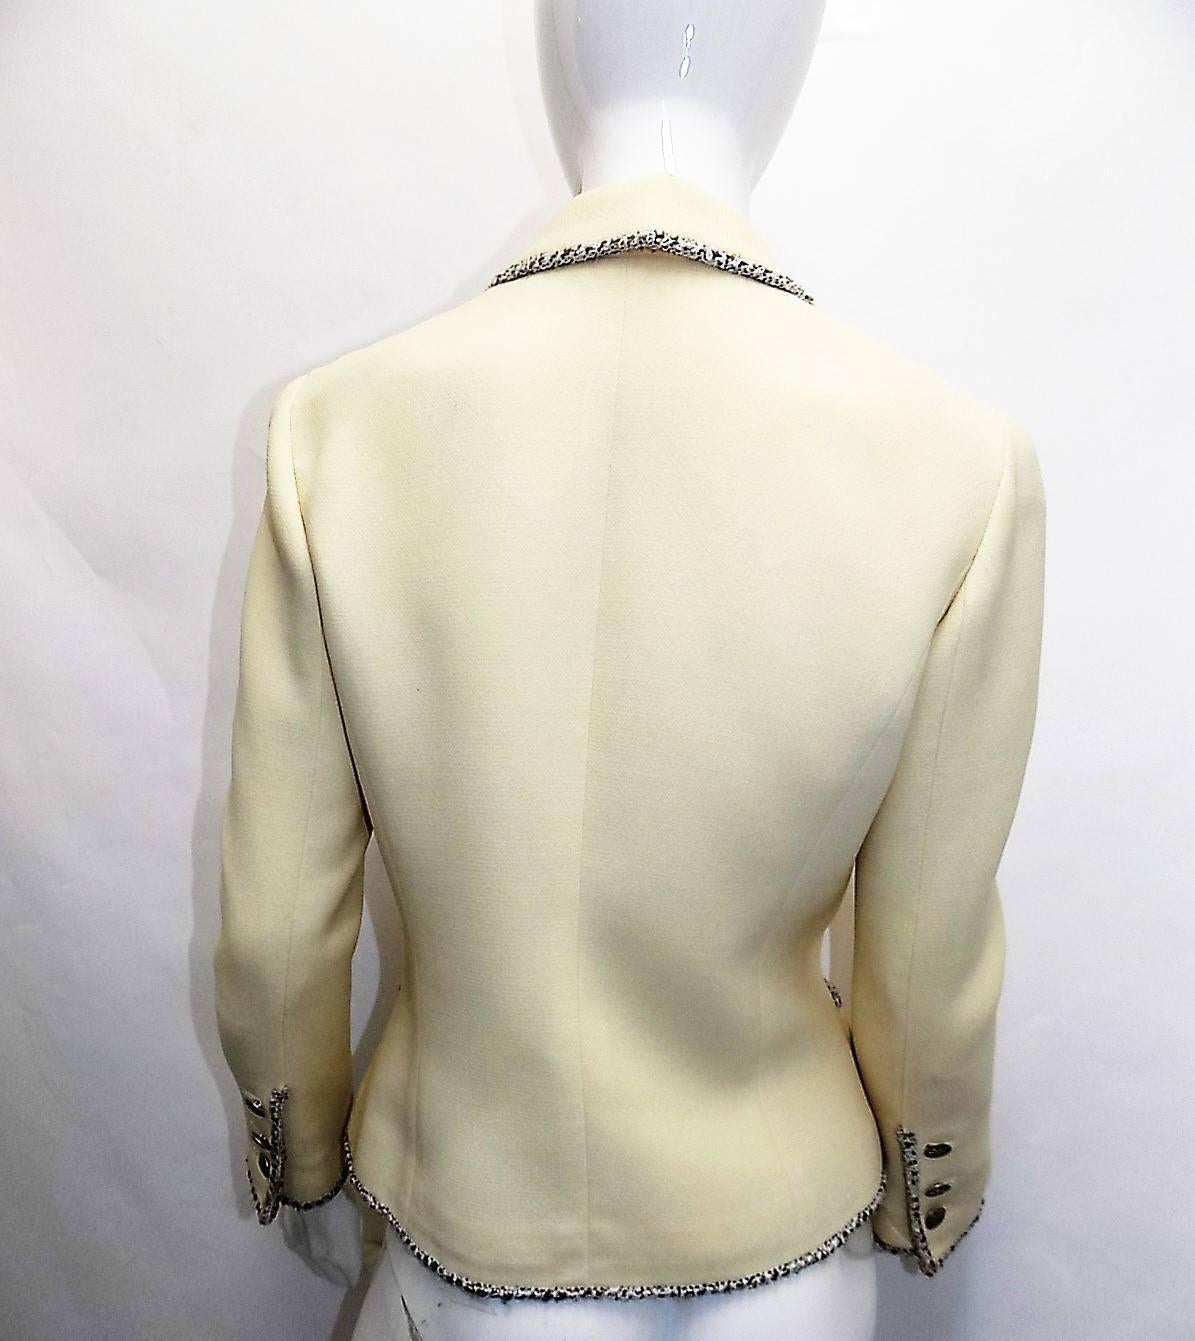 Women's Chanel ivory cropped jacket with CC logo pocket patch 